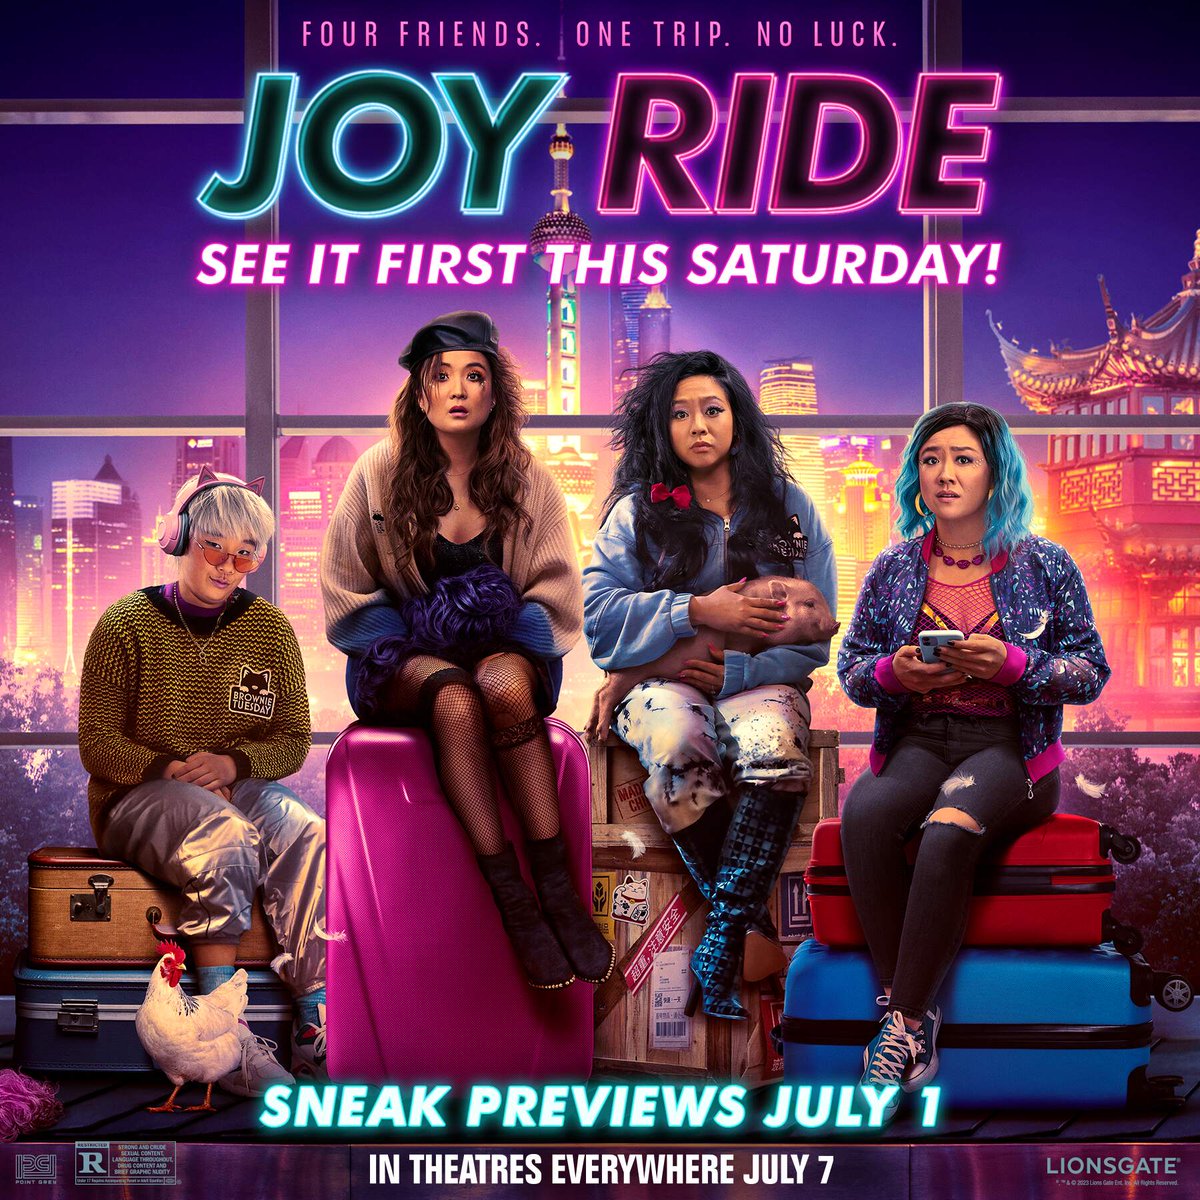 Get ready to take a trip of a lifetime 😉✈️ 
Be the first to see #JoyRideMovie at #AMCTheatres with special sneak previews - THIS SATURDAY, July 1. 🎟 bit.ly/3CT3nBS